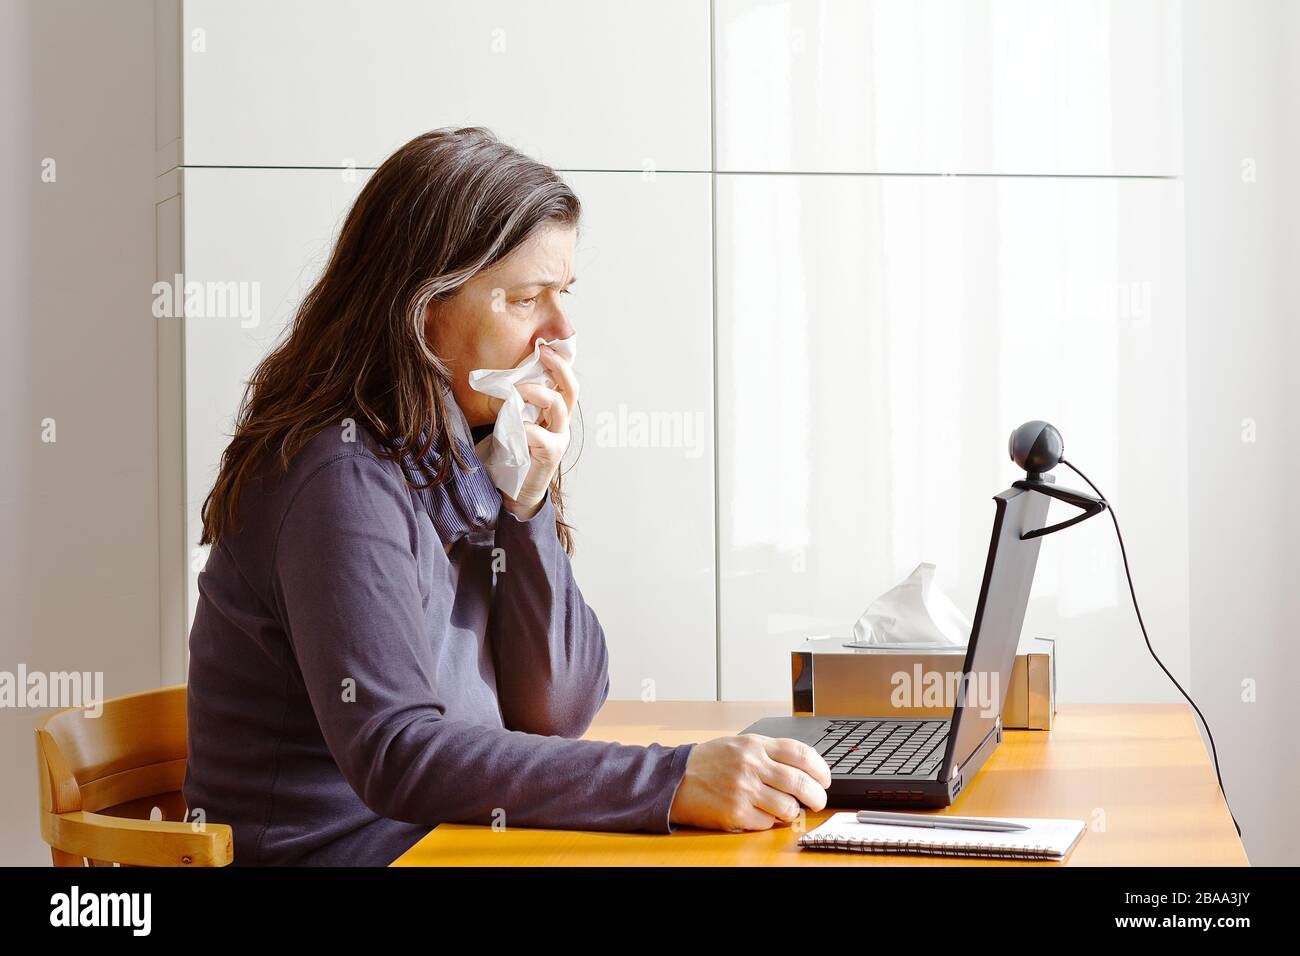 Corona virus hotline: woman with a cough calling her doctor on a laptop via video link. Stock Photo